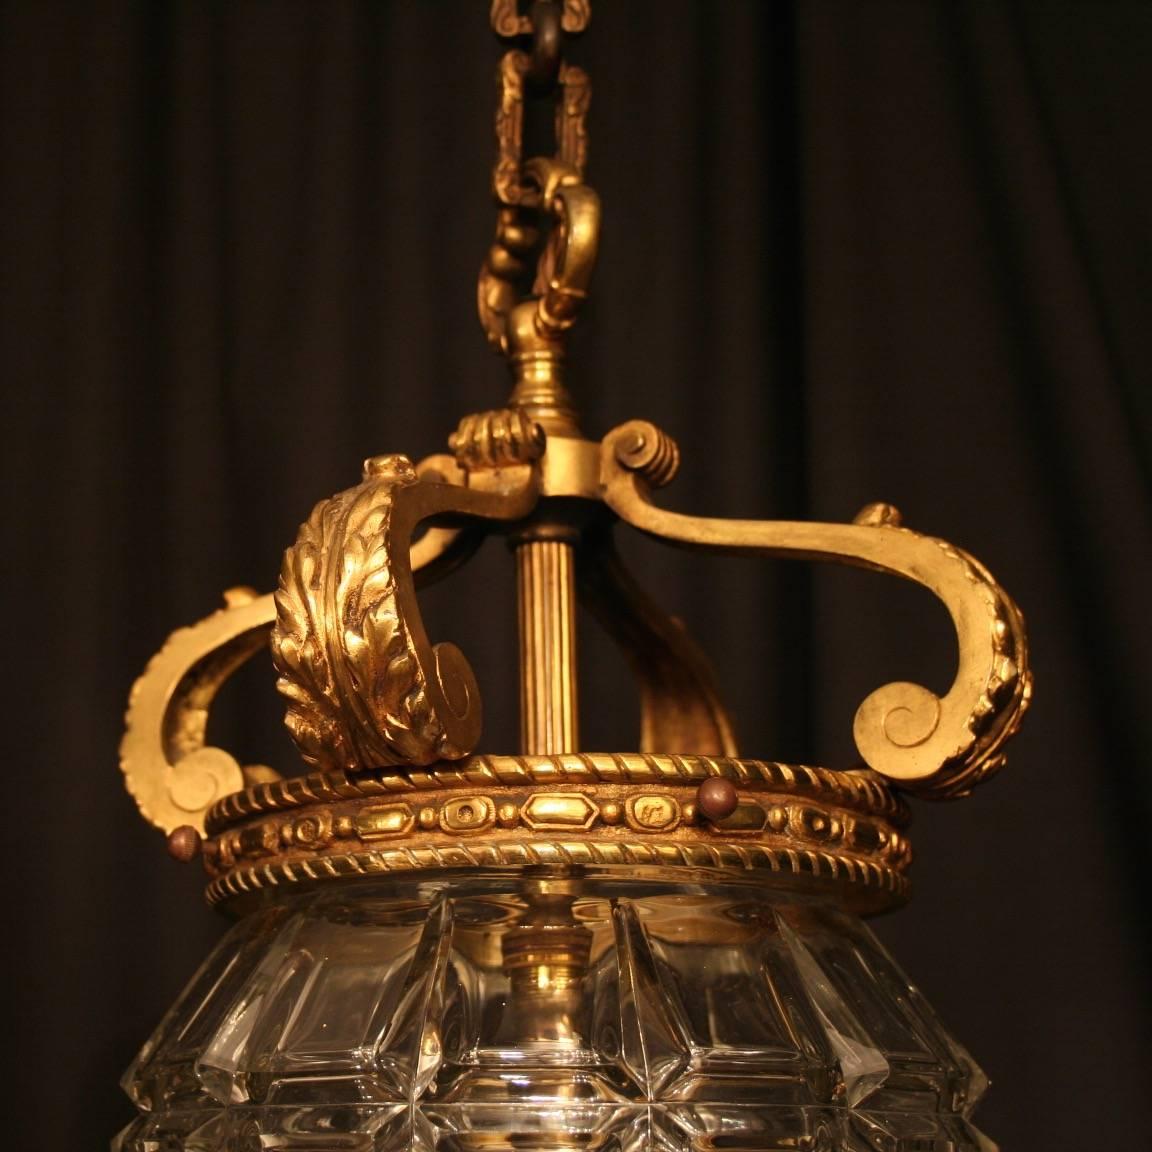 A French gilded cast bronze single light antique hall lantern, the inverted light fittings surrounded by a single lozenge cut-glass bowl and held within a very ornately cast bronze scrolling framework with lovely open top acanthus leaf canopy and